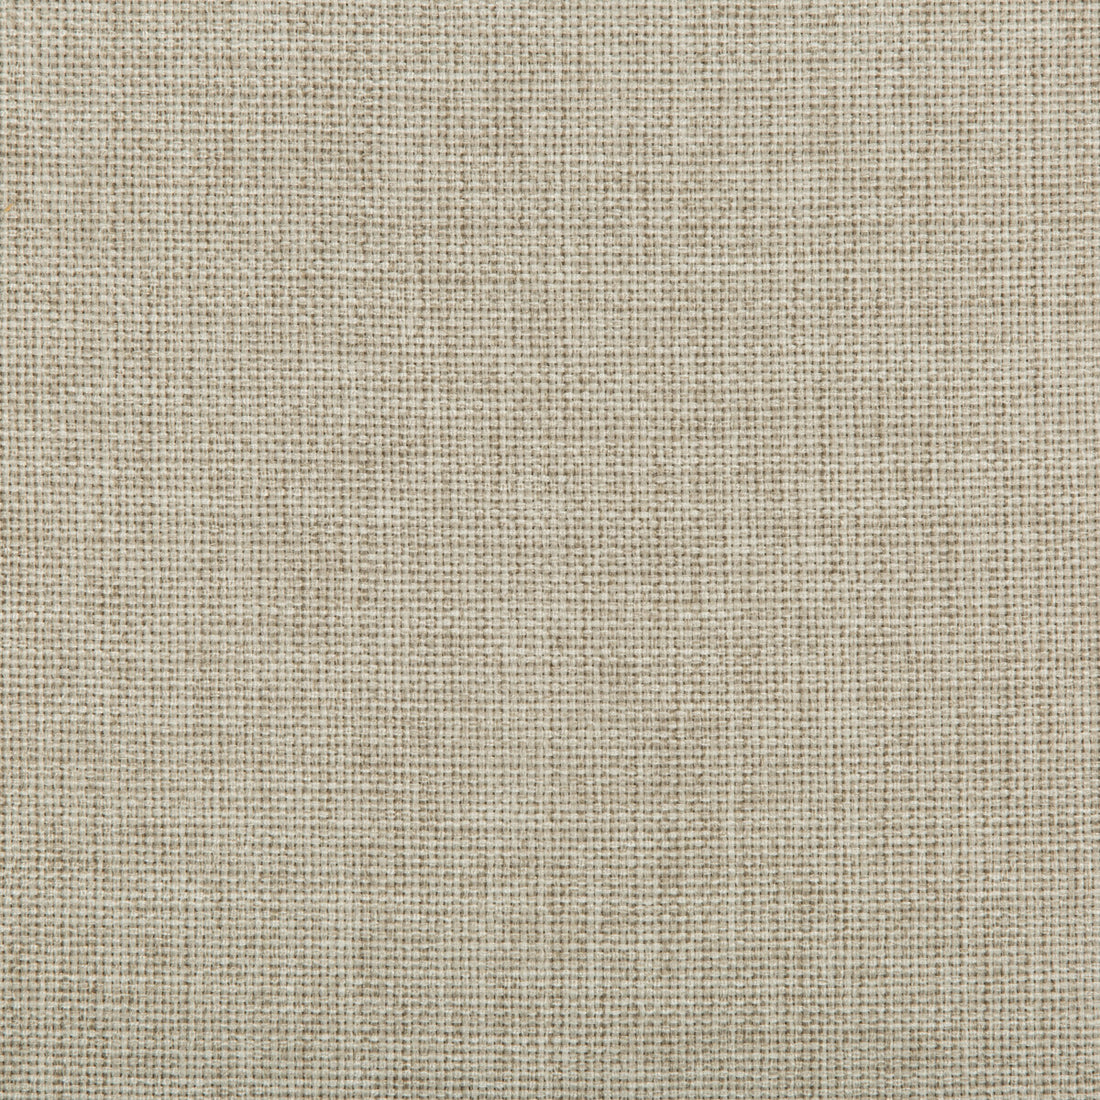 Kravet Contract fabric in 4637-11 color - pattern 4637.11.0 - by Kravet Contract